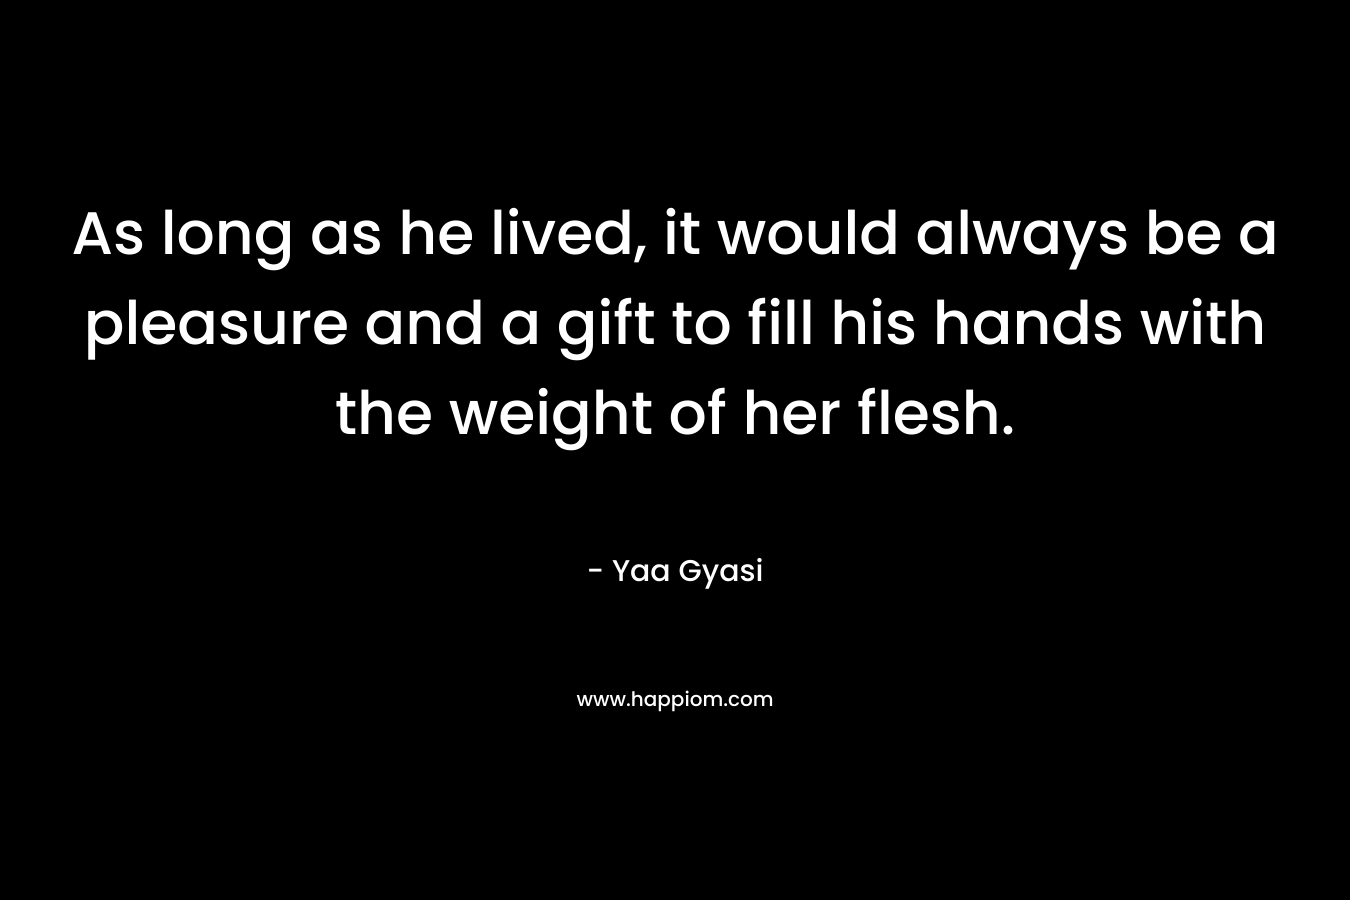 As long as he lived, it would always be a pleasure and a gift to fill his hands with the weight of her flesh. – Yaa Gyasi